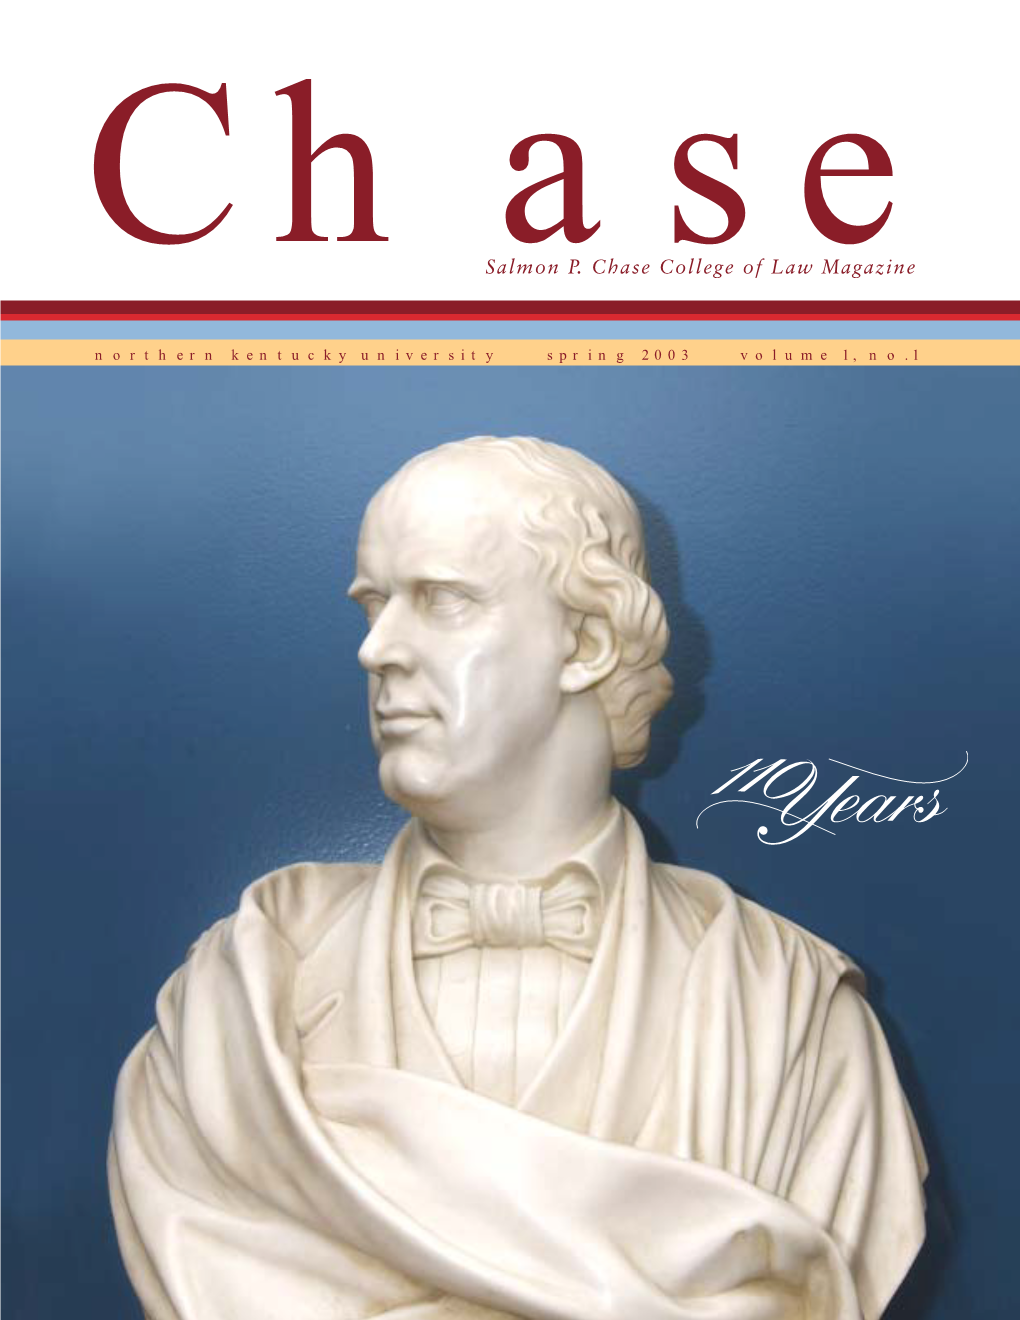 Salmon P. Chase College of Law Magazine